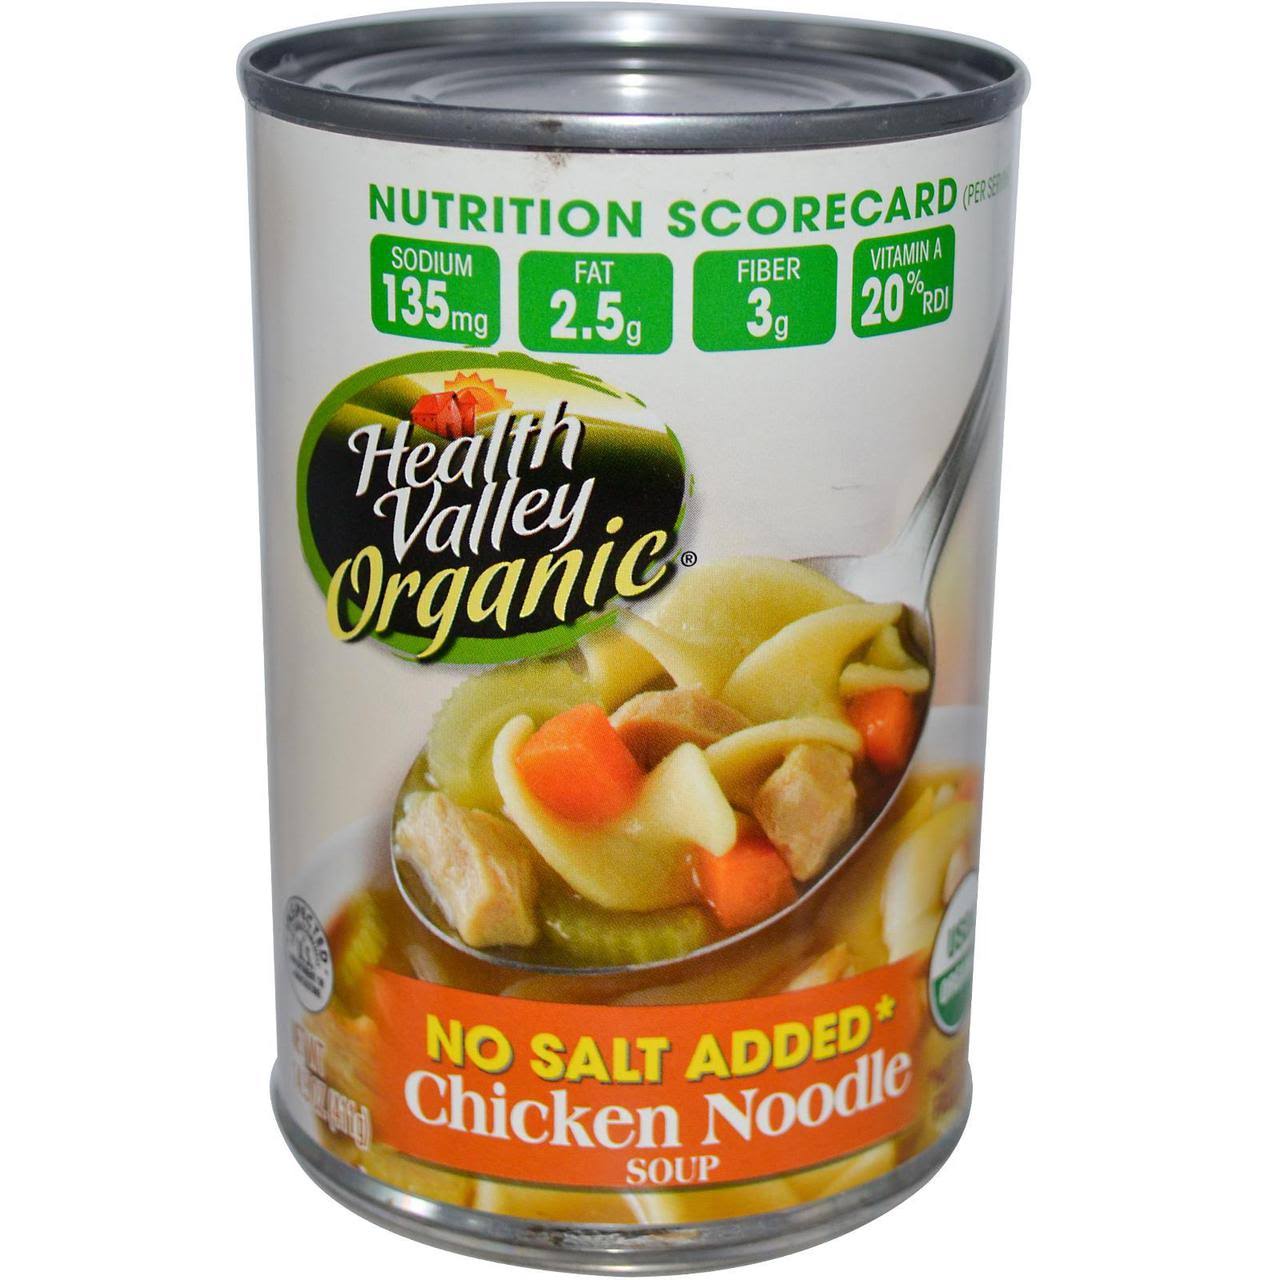 Healthy Valley Organic Soup - Chicken Noodle